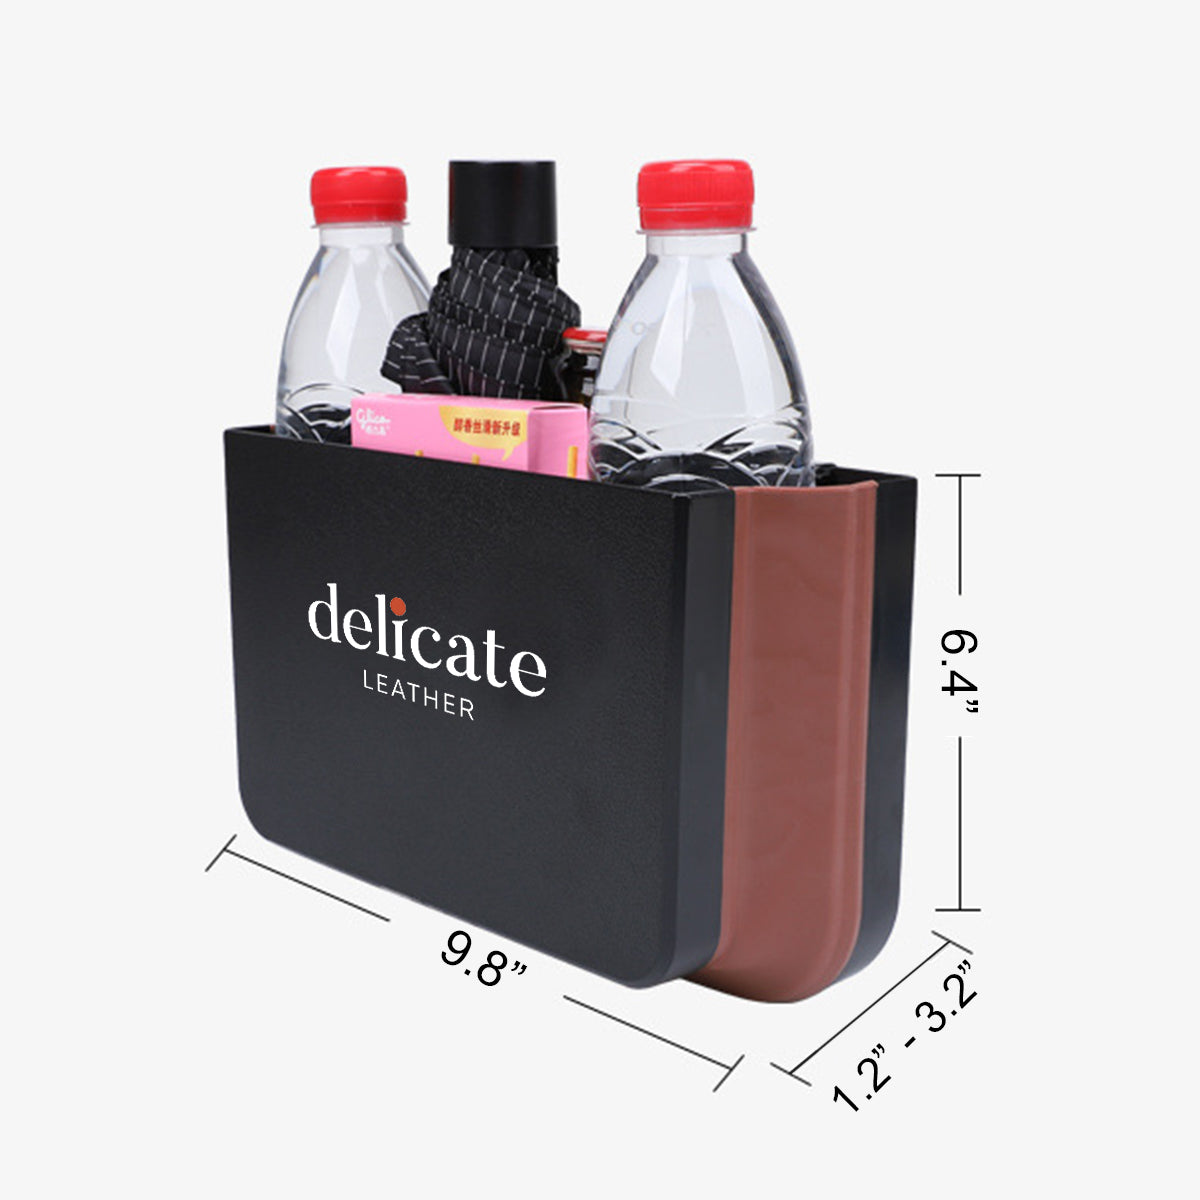 Delicate Leather Hanging Waterproof Car Trash can-Foldable, Custom For Your Cars, Waterproof, and Equipped with Cup Holders and Trays. Multi-Purpose, Car Accessories LM11992